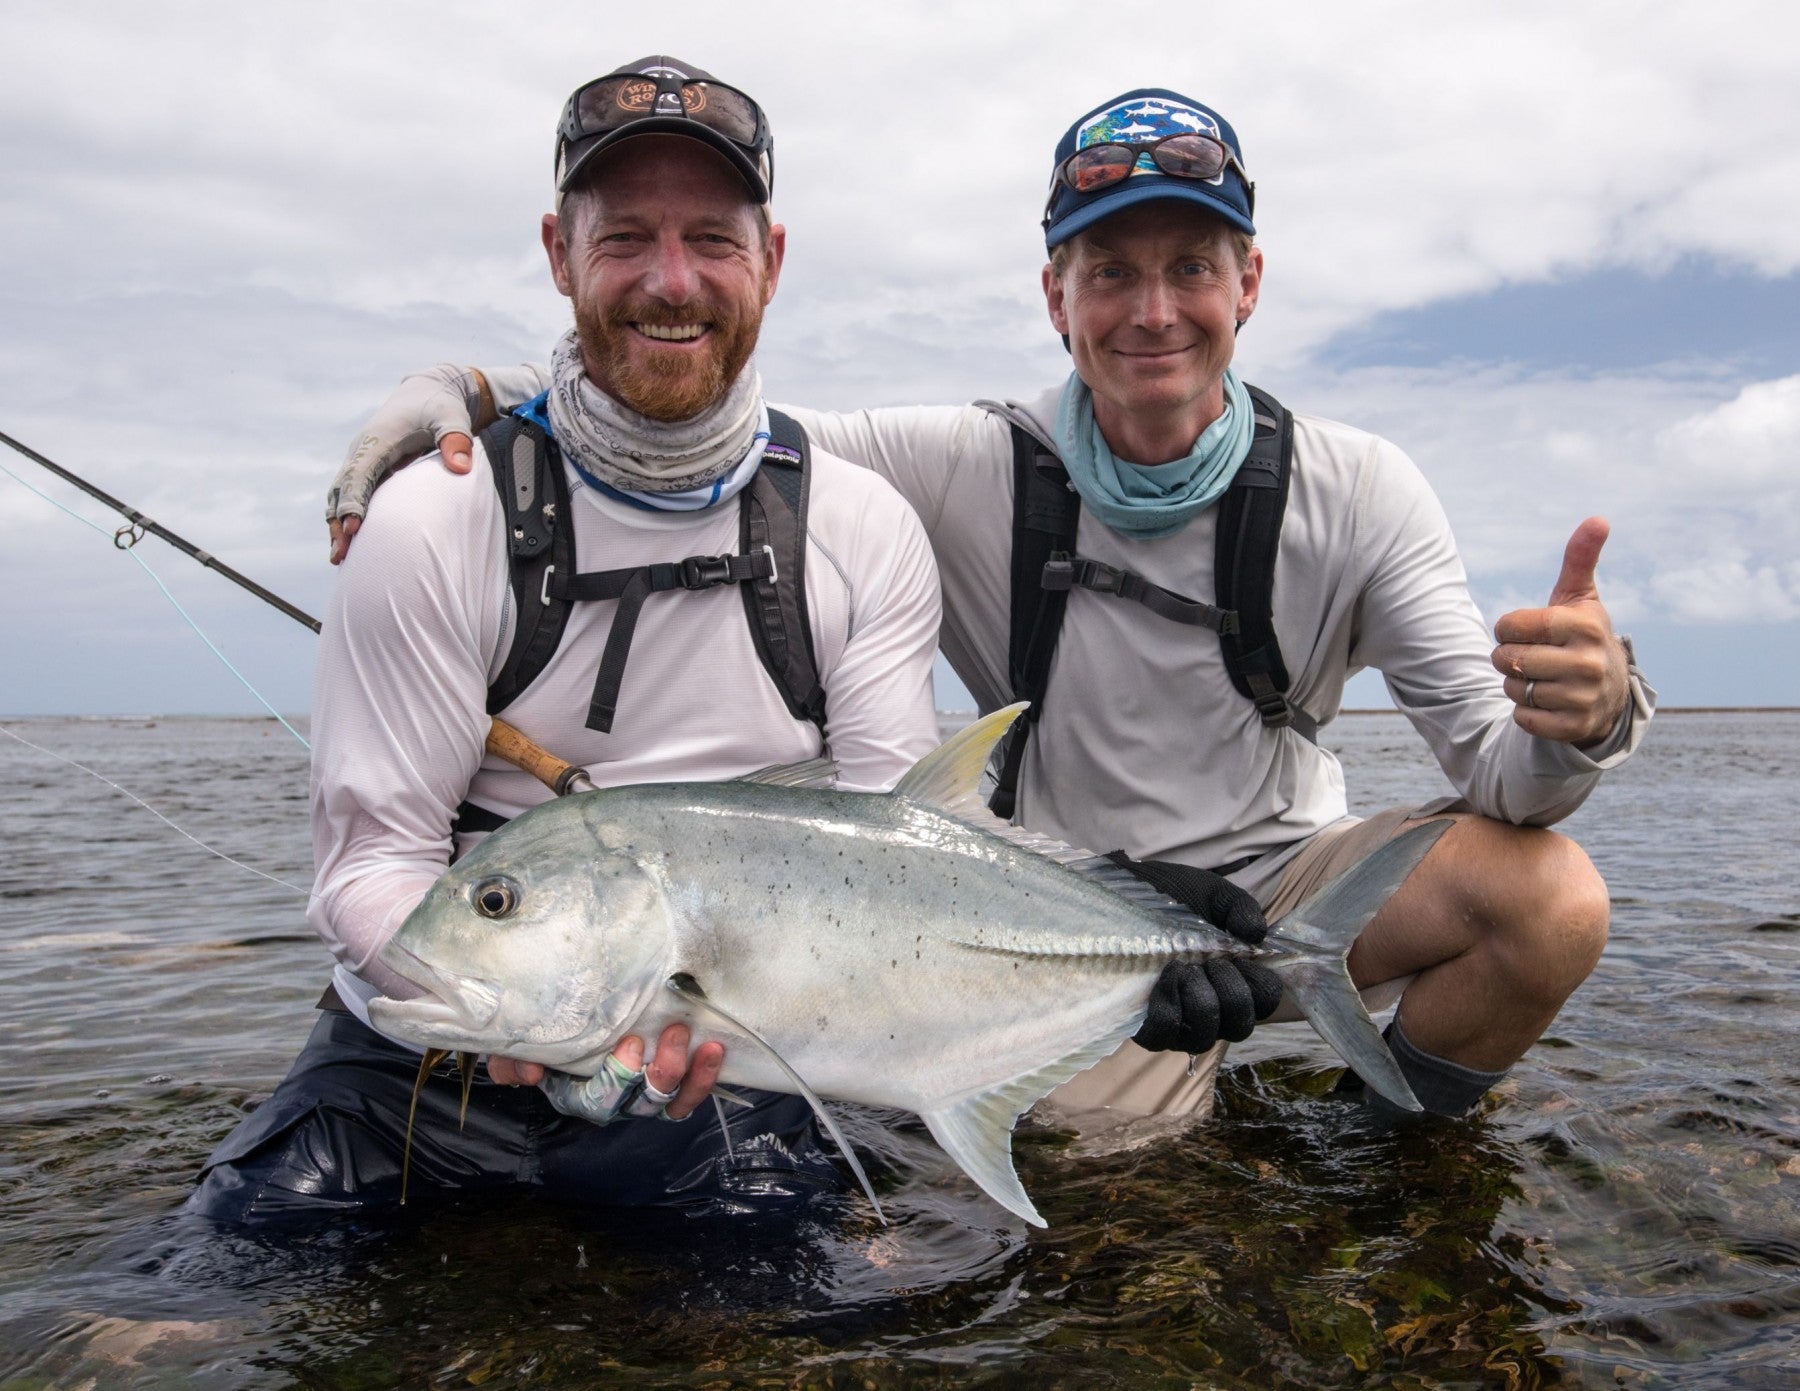 An In-Depth Guide to Fly Fishing for Giant Trevally